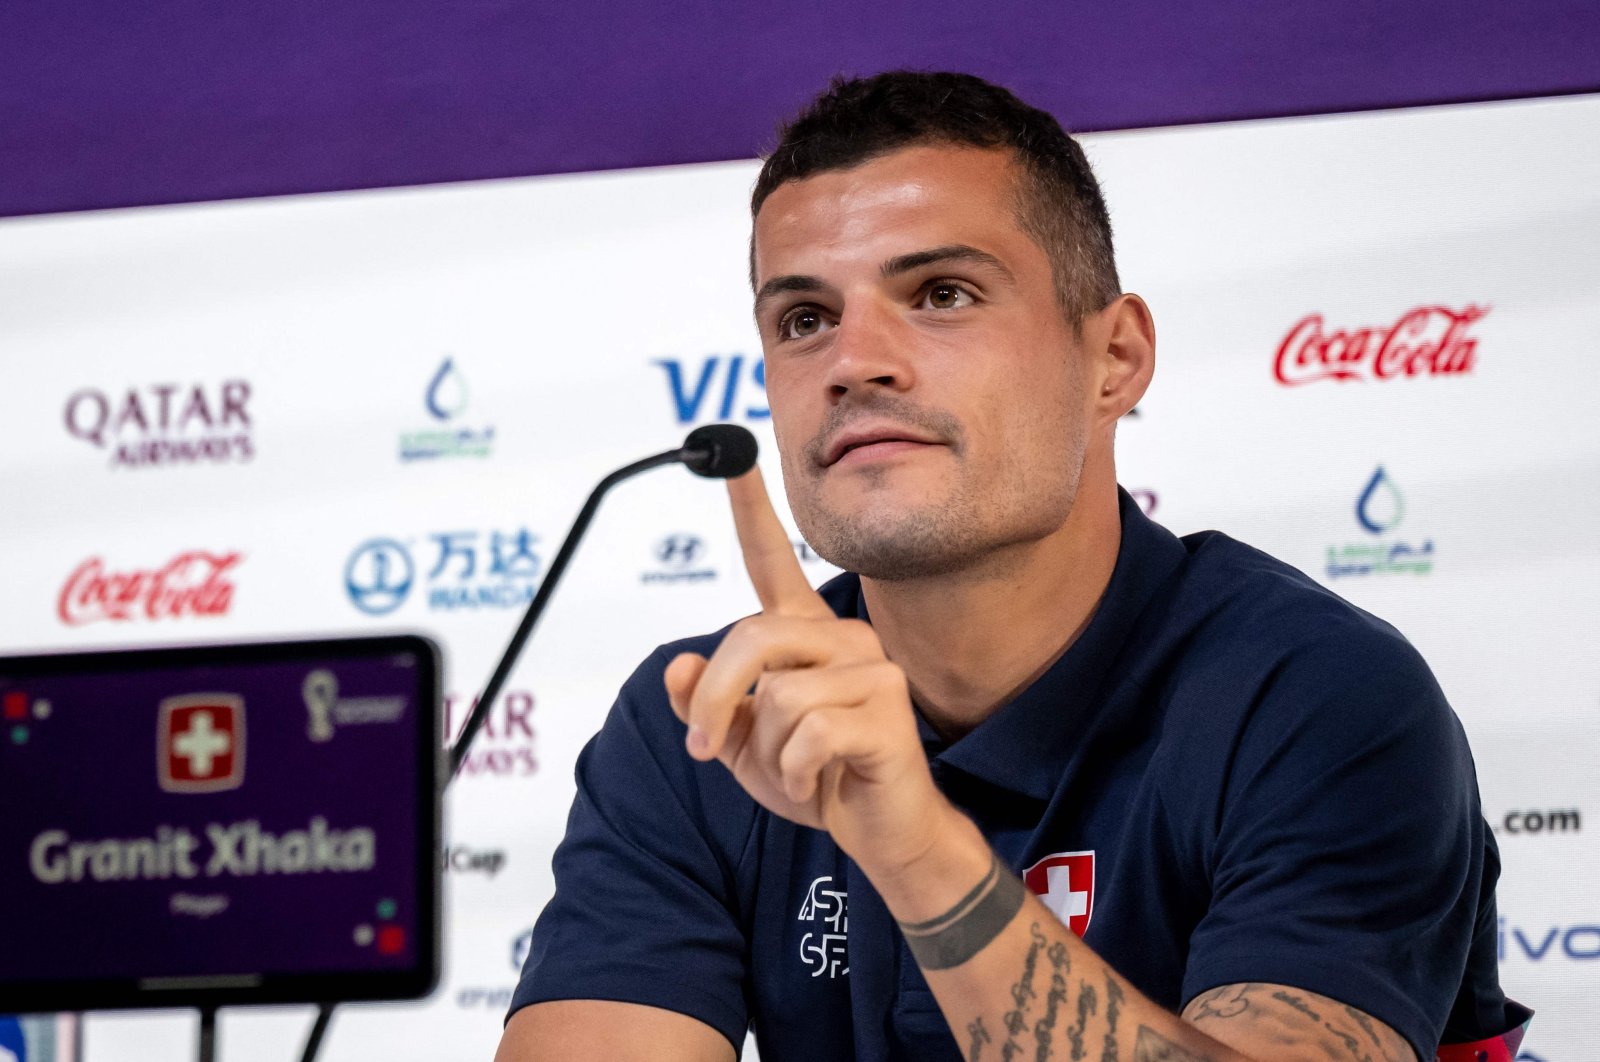 Switzerland&#039;s midfielder Granit Xhaka attends a press conference on the eve of the Qatar 2022 World Cup football match between Switzerland and Cameroon. Doha, Qatar, Nov. 23 2022. (AFP Photo)